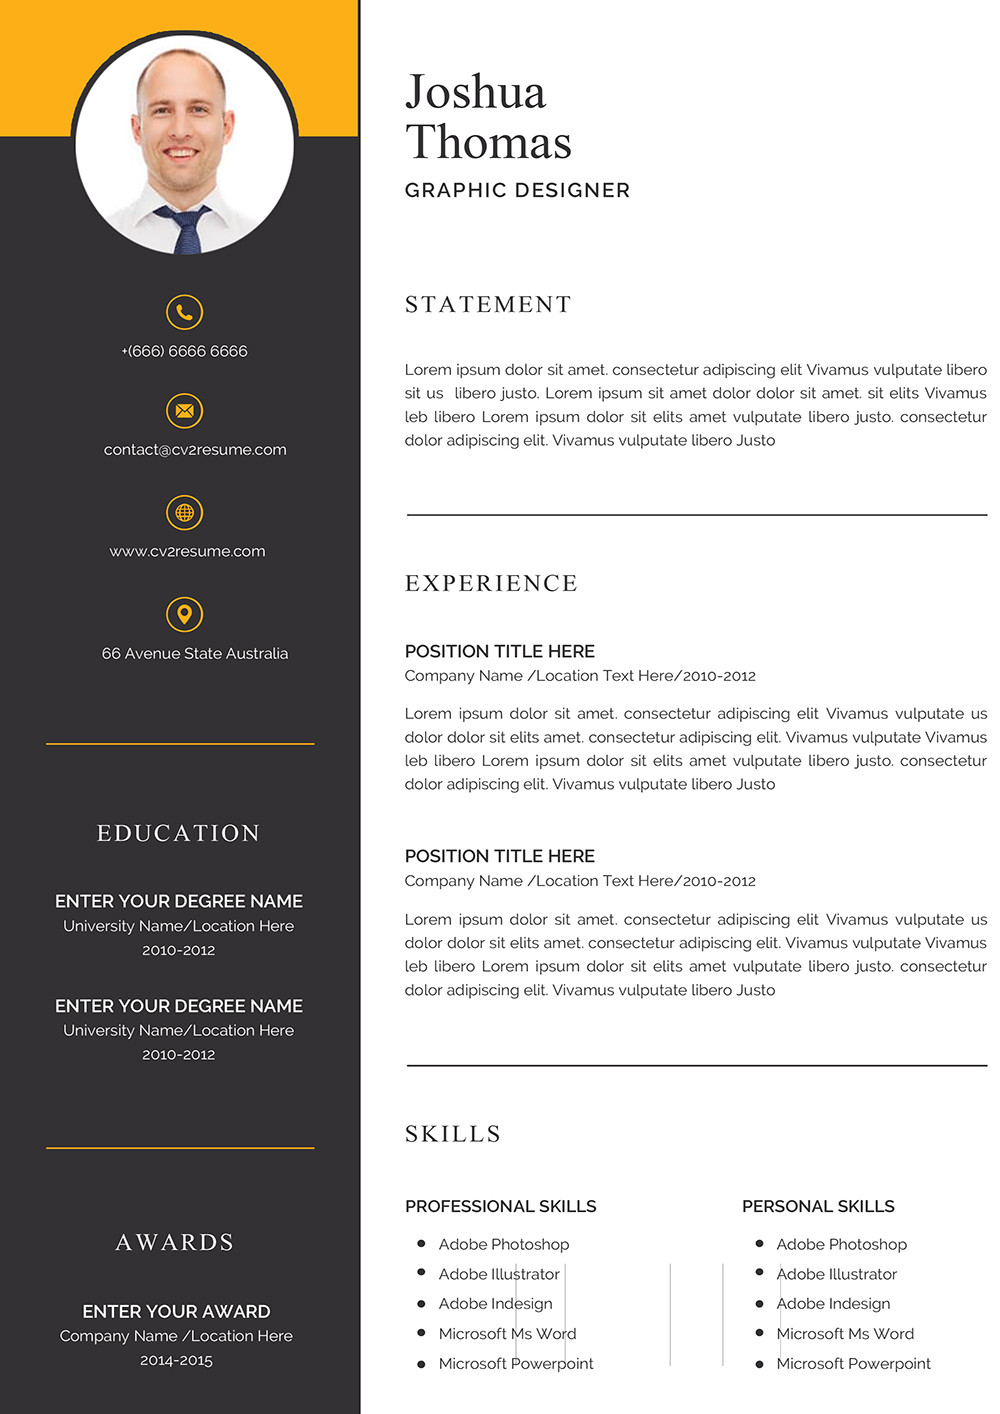 Resume Template Resume Template Resume Template Classic Resume Template In Microsoft Word format to Download